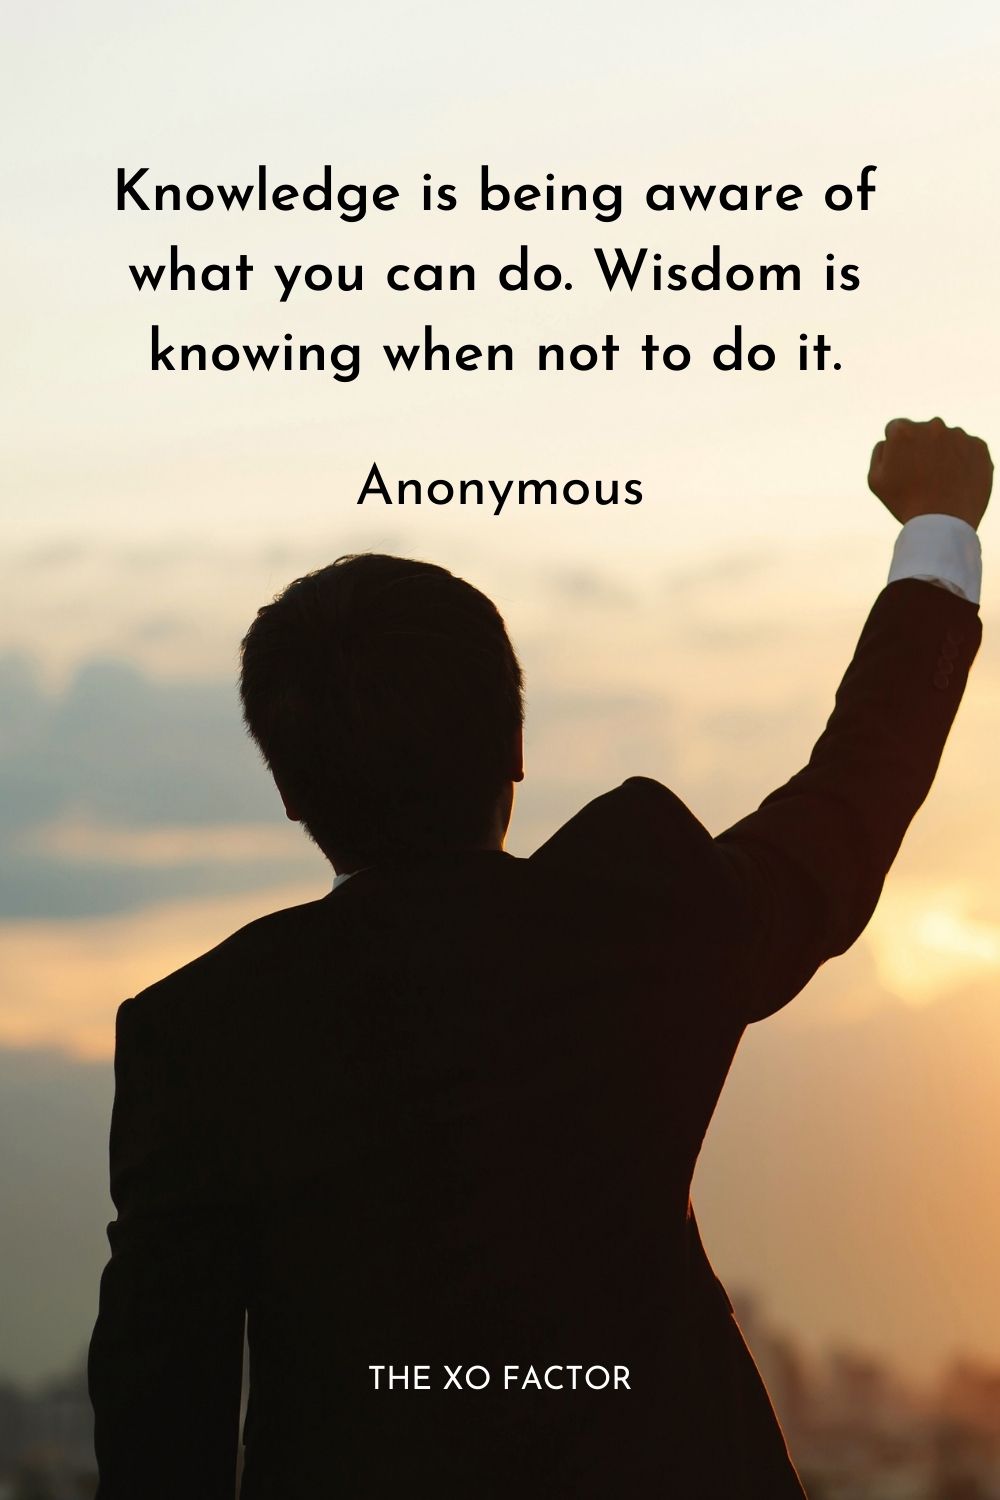 Knowledge is being aware of what you can do. Wisdom is knowing when not to do it.